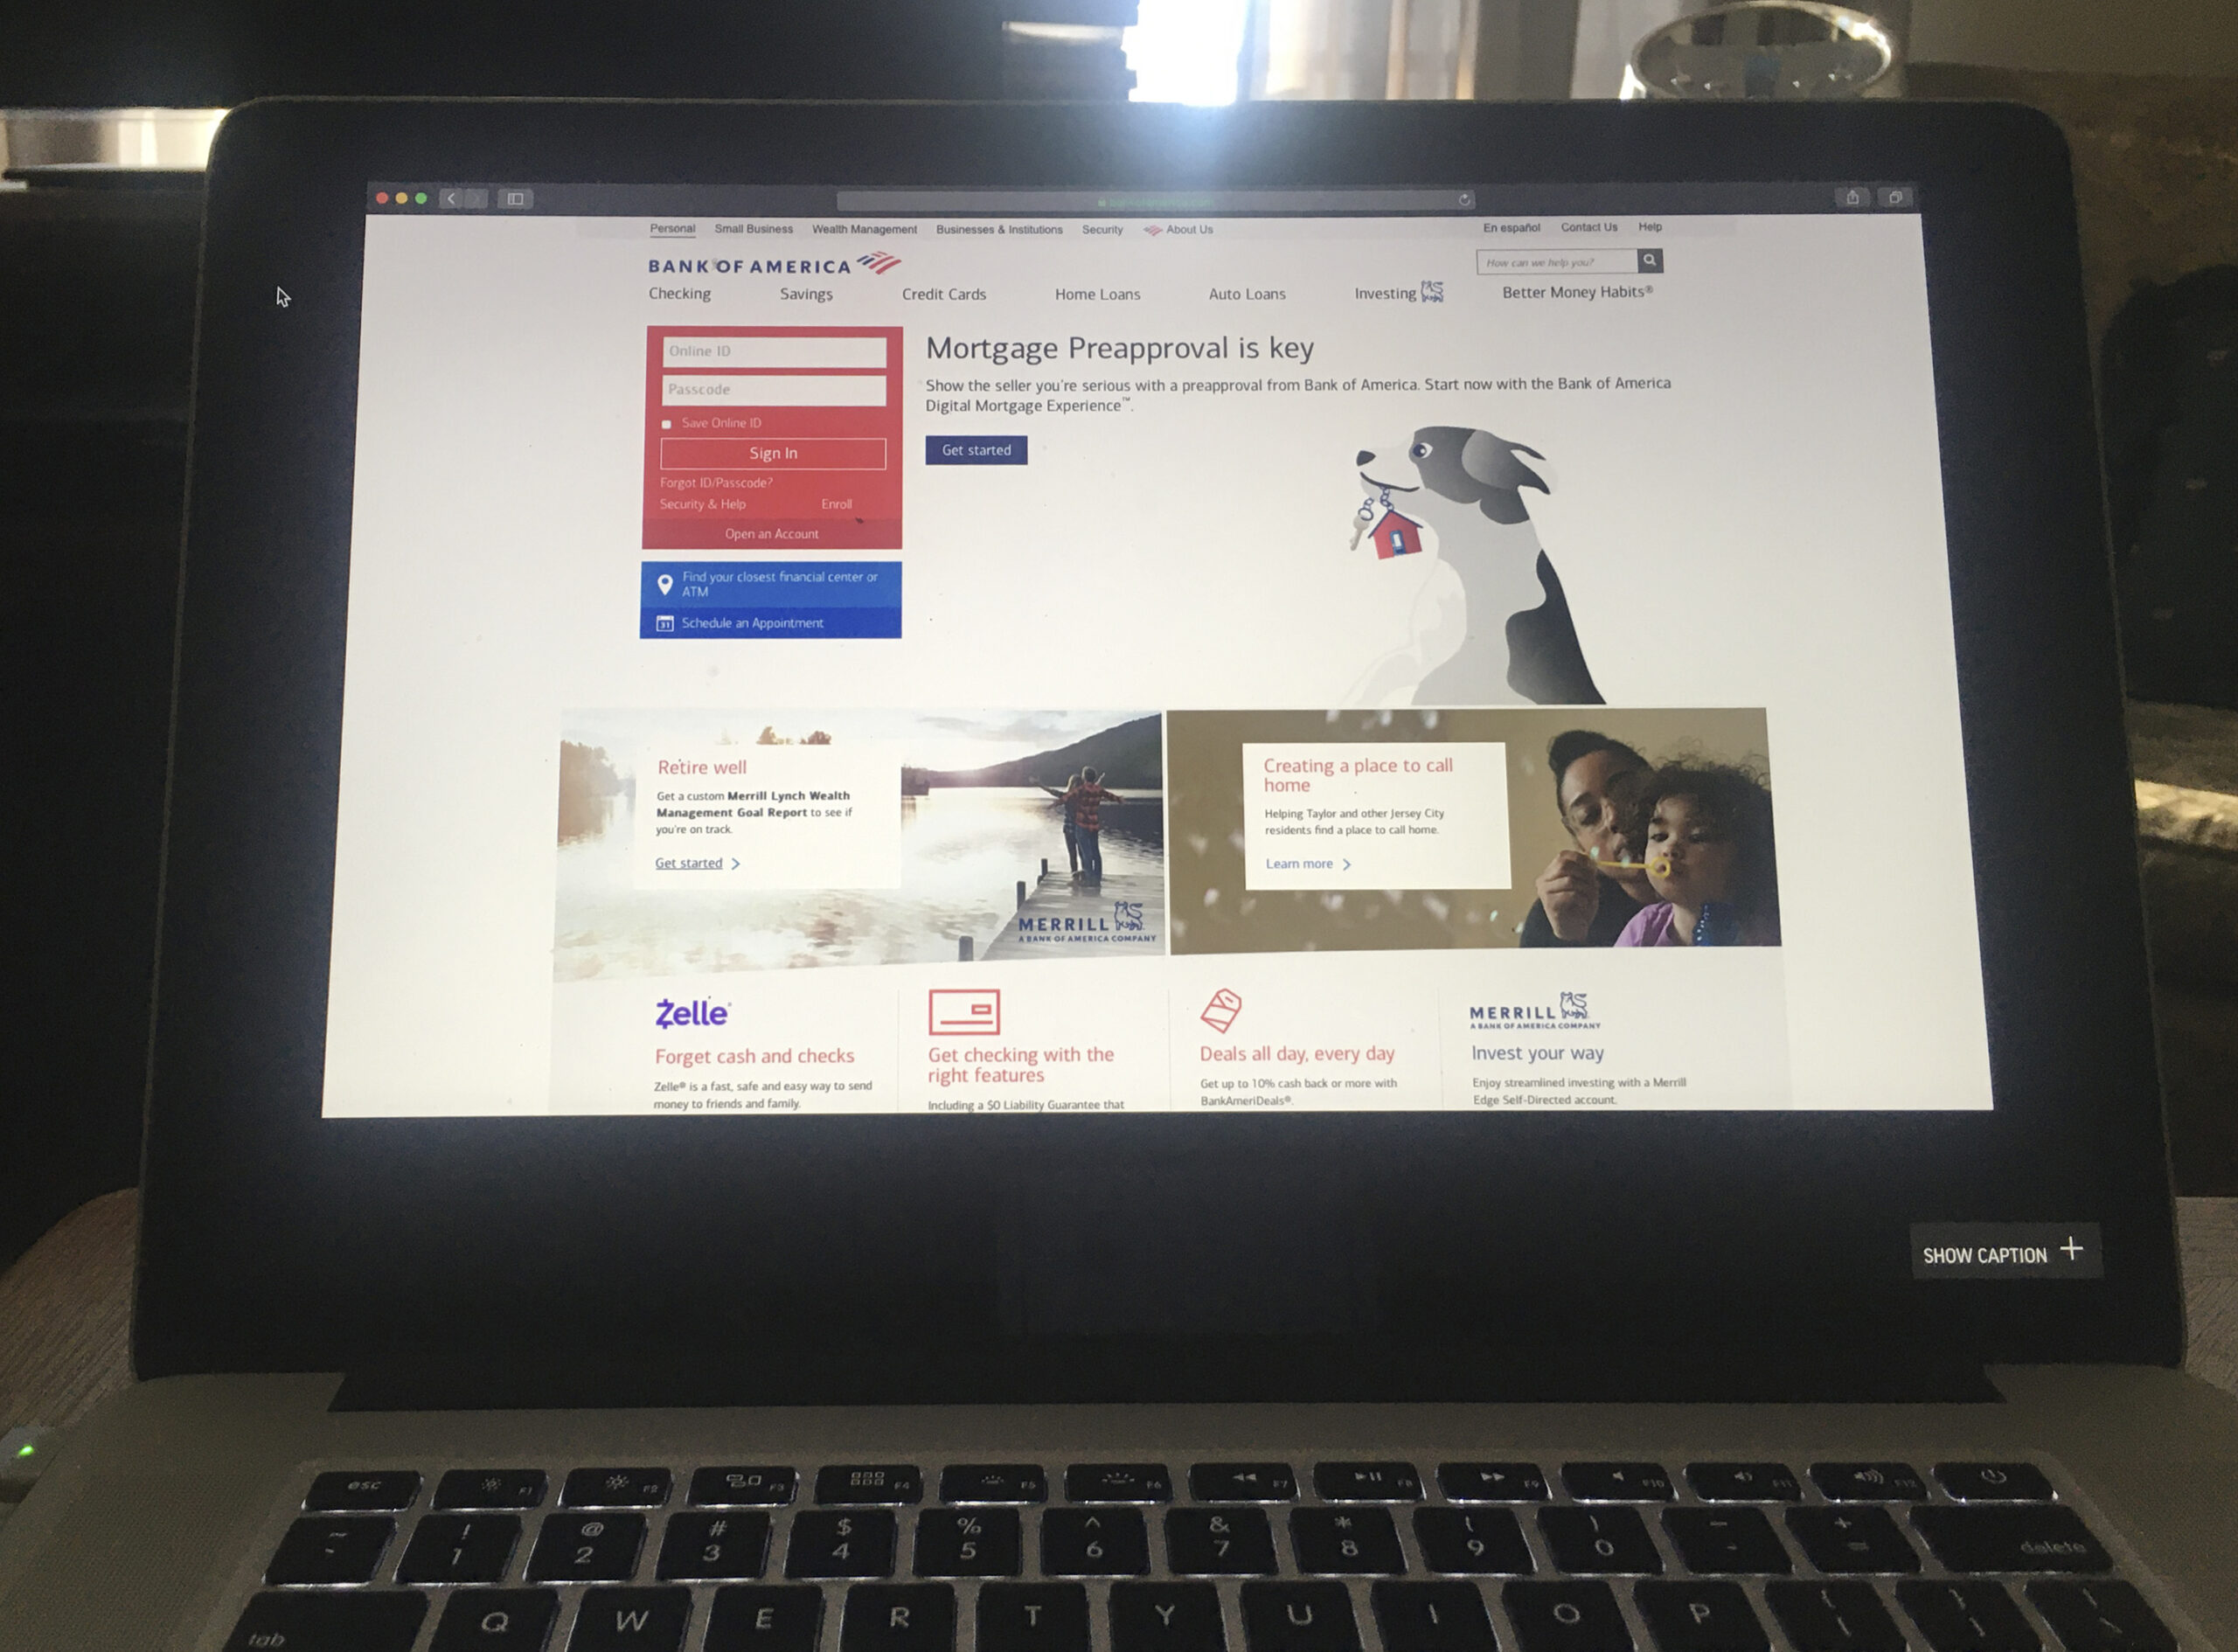 Bank of America's homepage is displayed on a computer screen